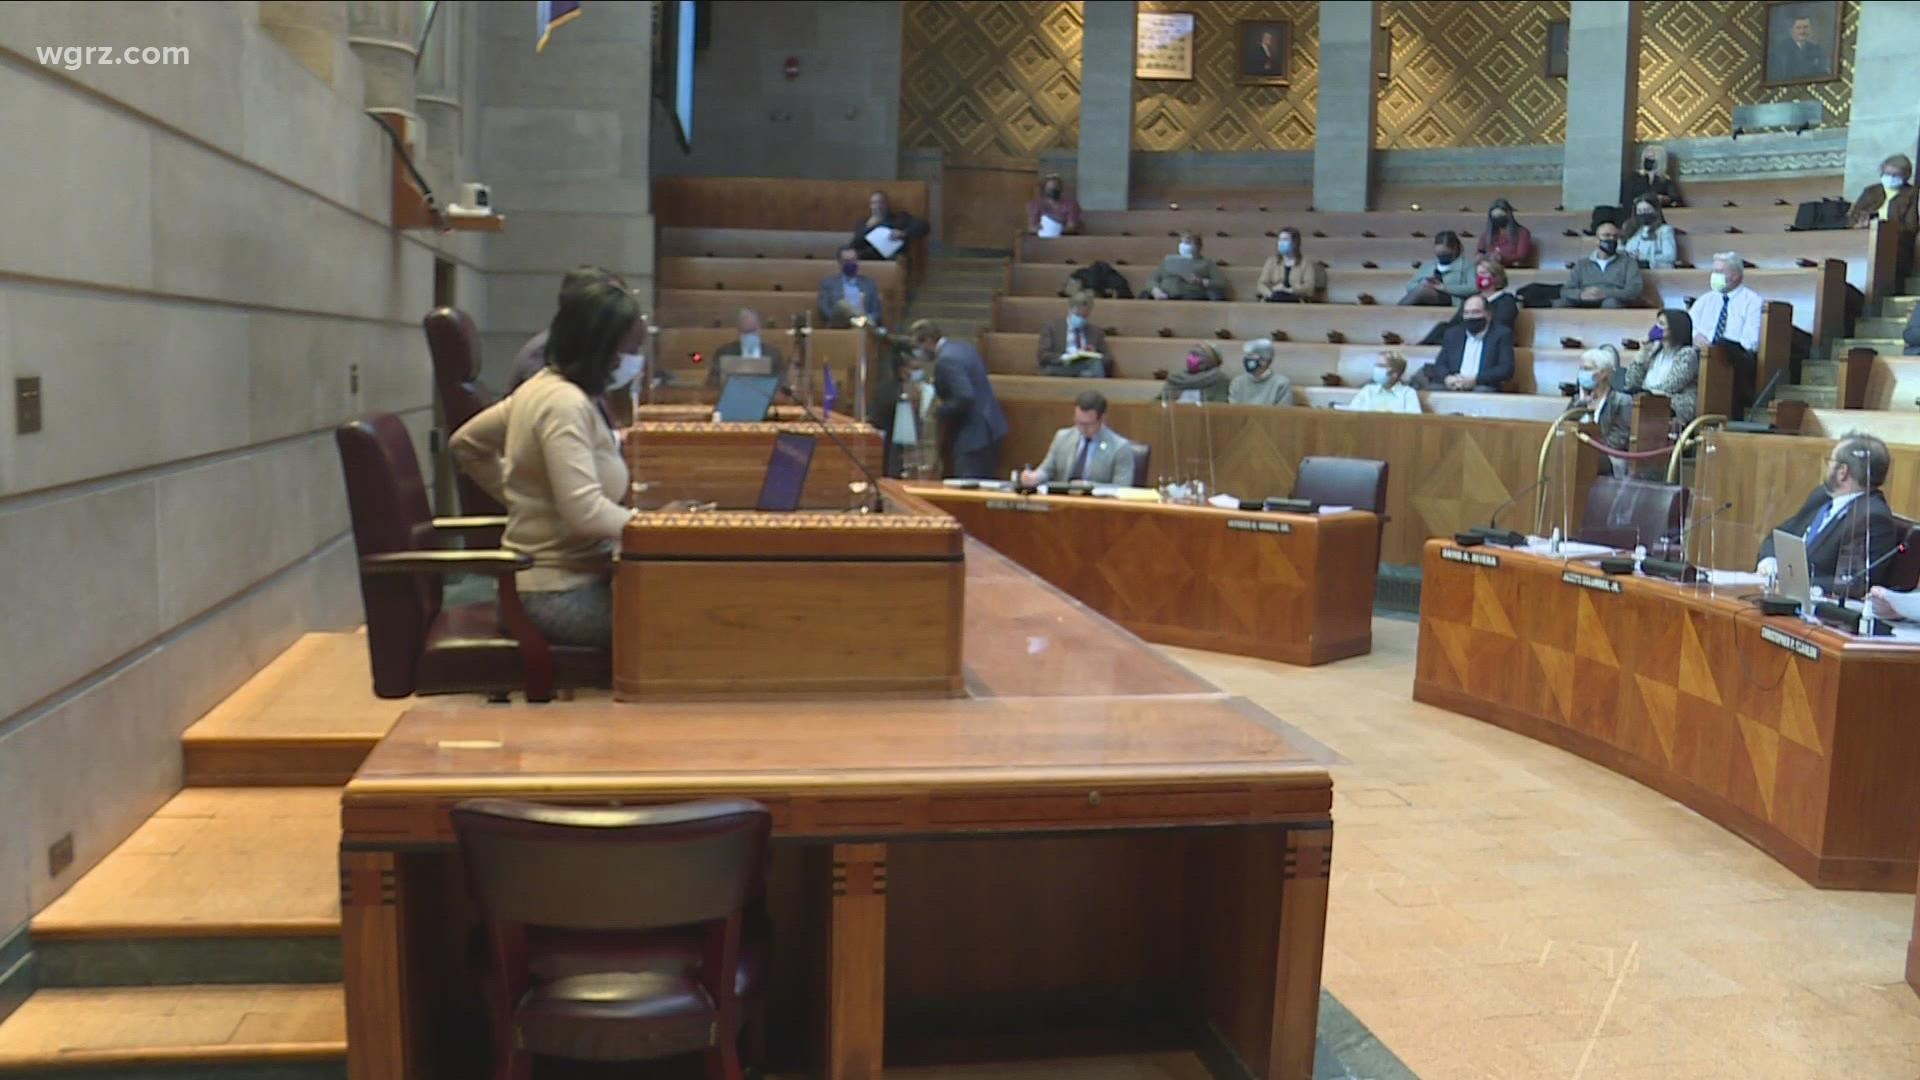 The Buffalo Common Council announced today that all meetings will be virtual starting a week from today